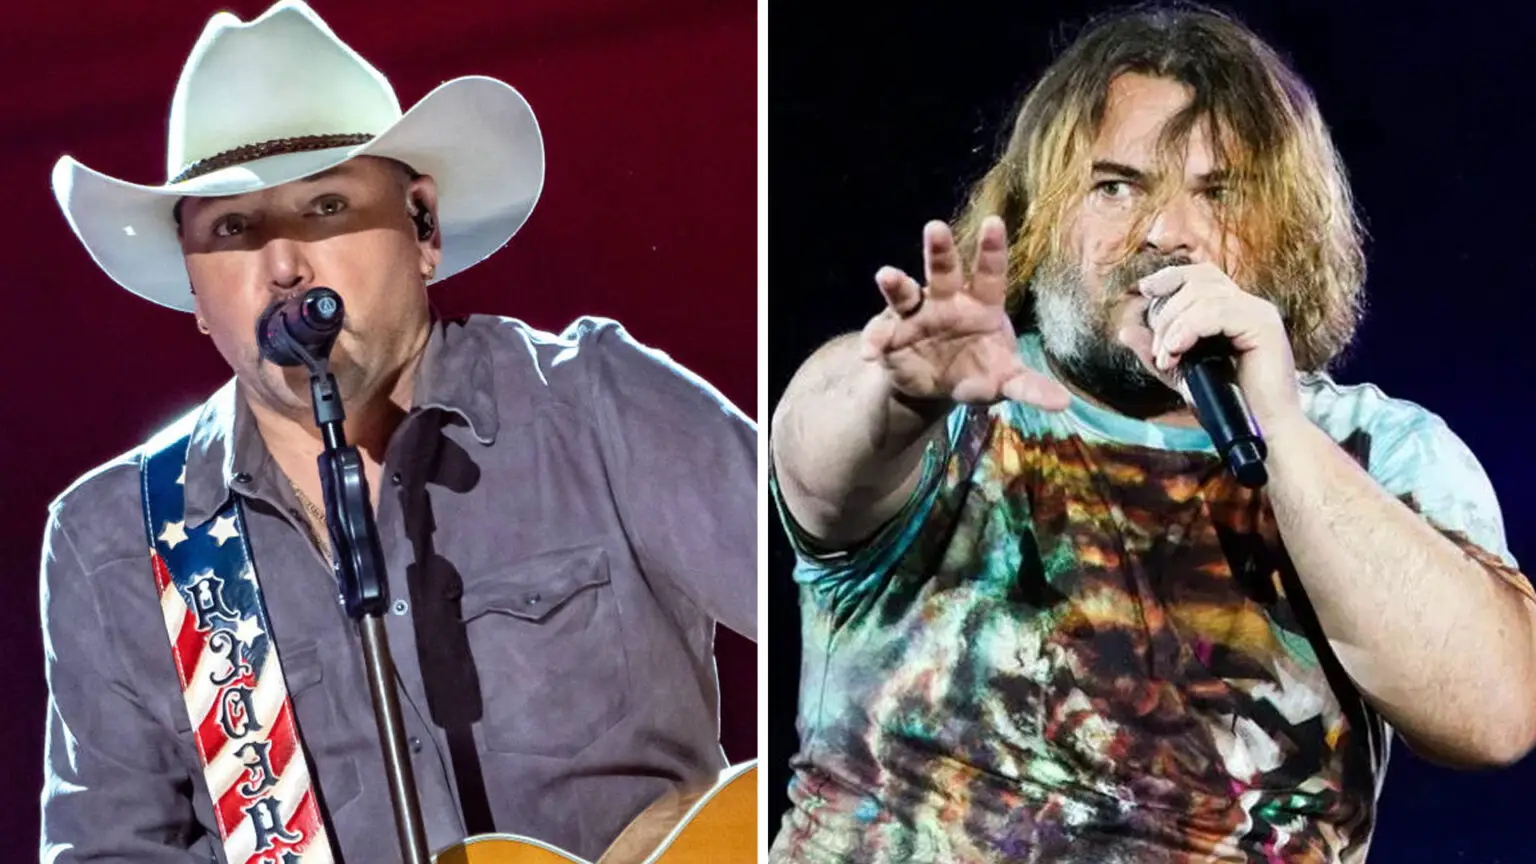 Breaking: Jason Aldean Throws Jack Black Out of His Concert, Refuses to Let Him On Stage, “Never in a Million Years with This Creep”